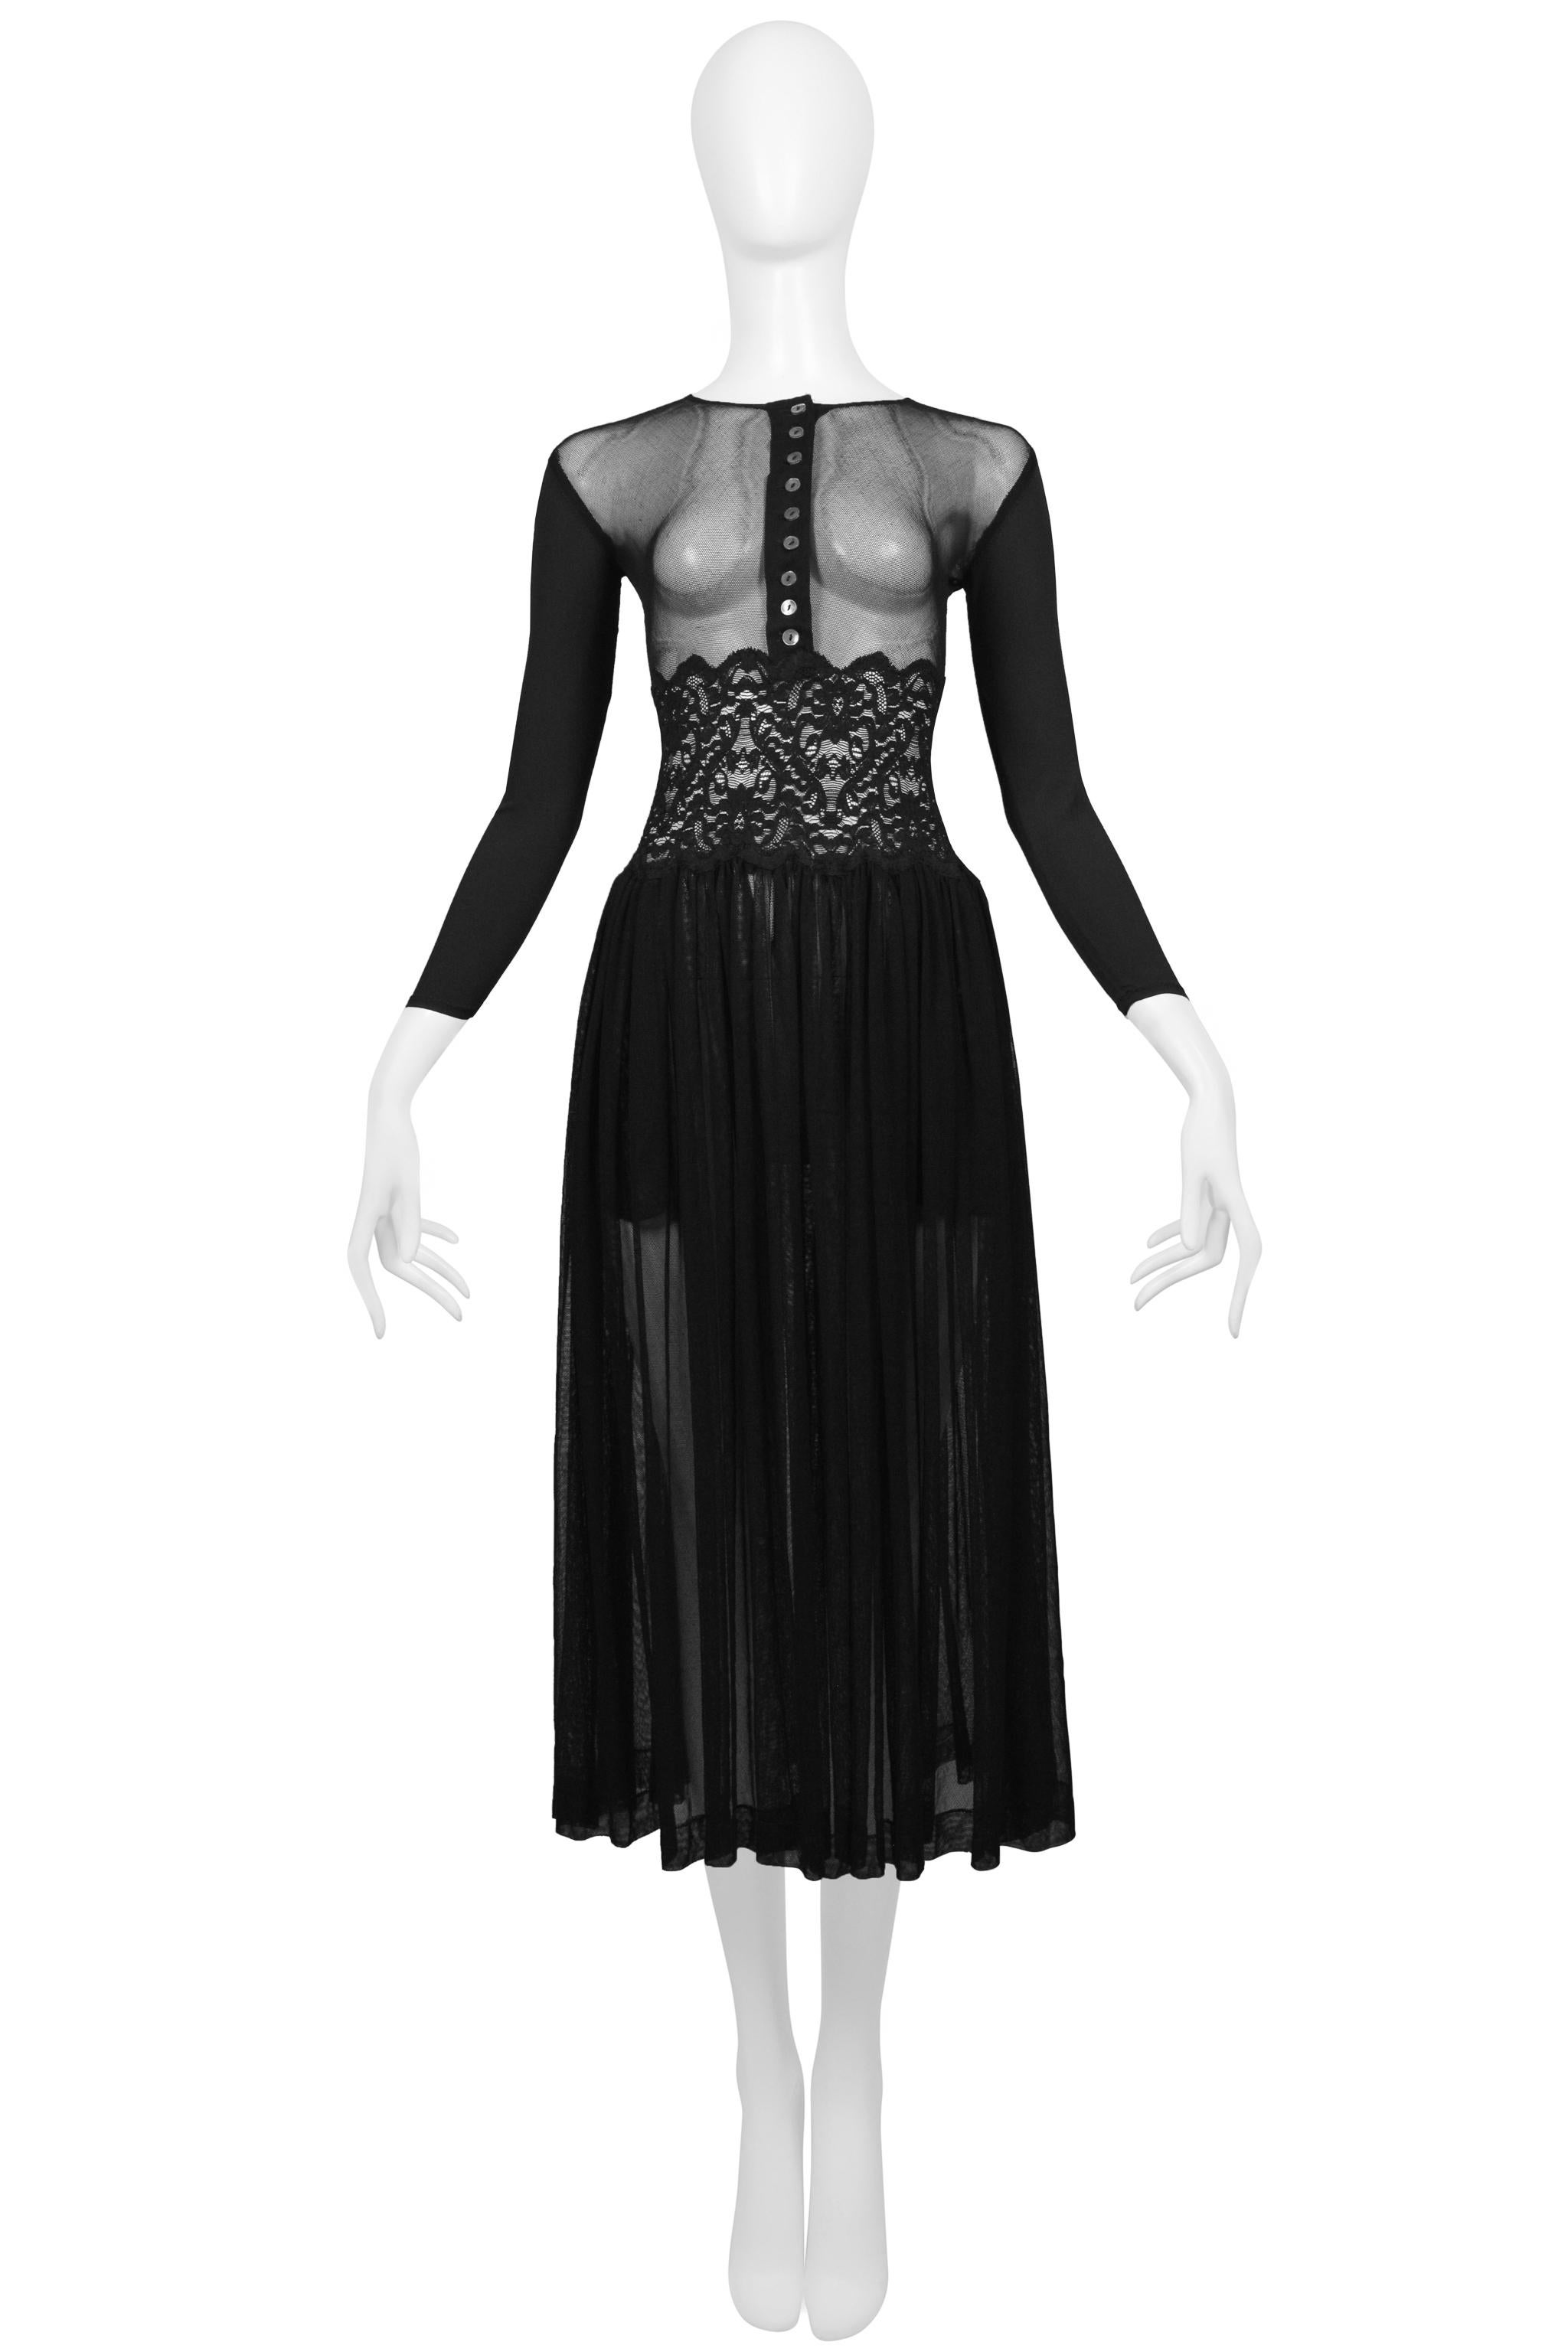 Resurrection Vintage is excited to offer a vintage Jean Paul Gaultier black mesh dress featuring solid sleeves, a sheer bodice with button front, lace waist detail, and gathered skirt.
* Jean Paul Gaultier
* Size: 40
* Fabric: 85% Lycra, 15%